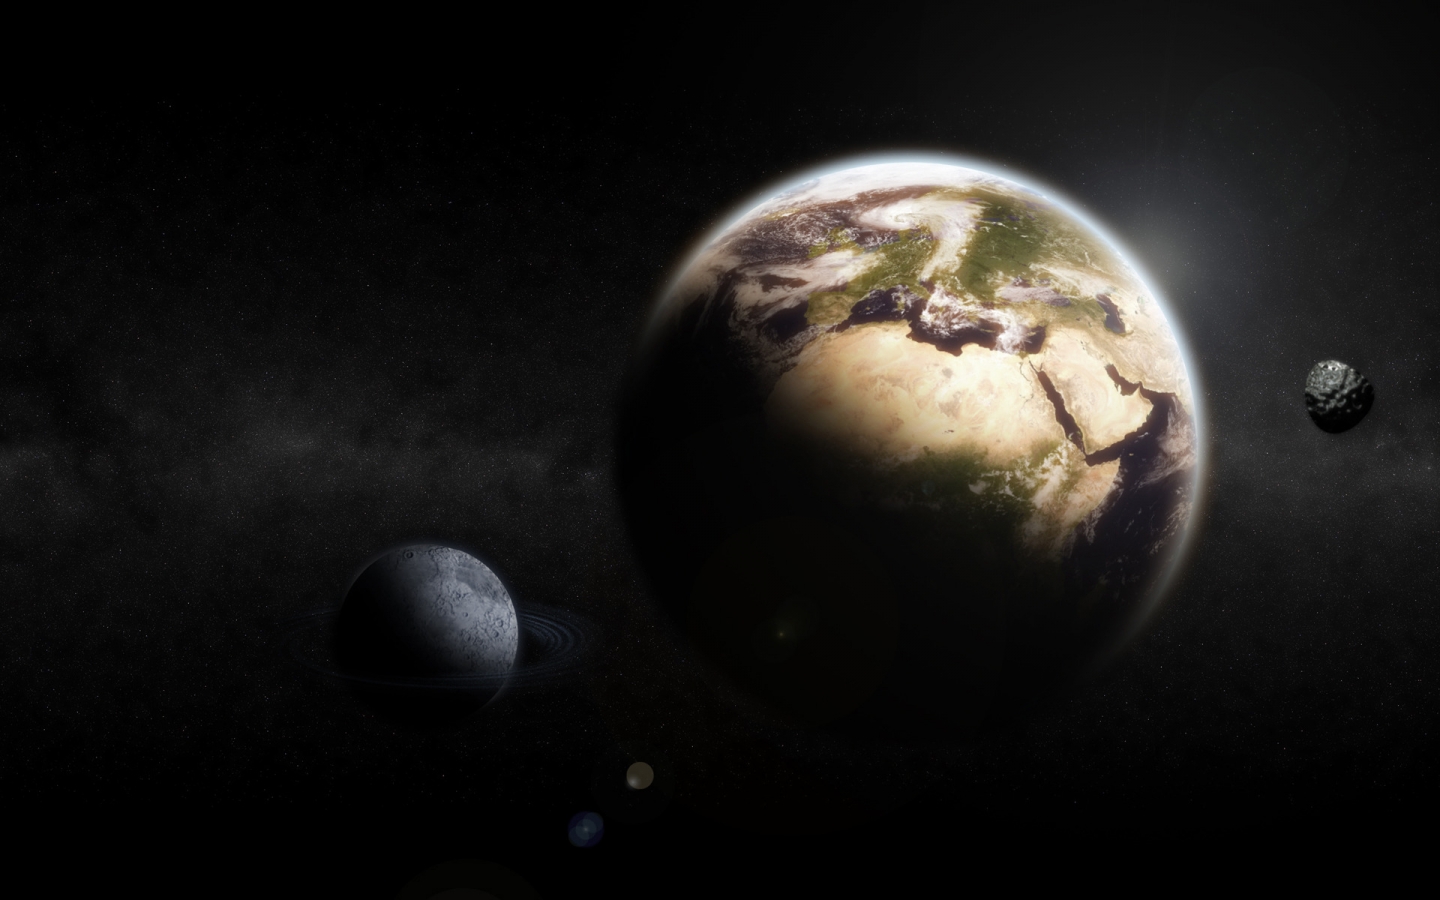 Earth & Moon for 1440 x 900 widescreen resolution